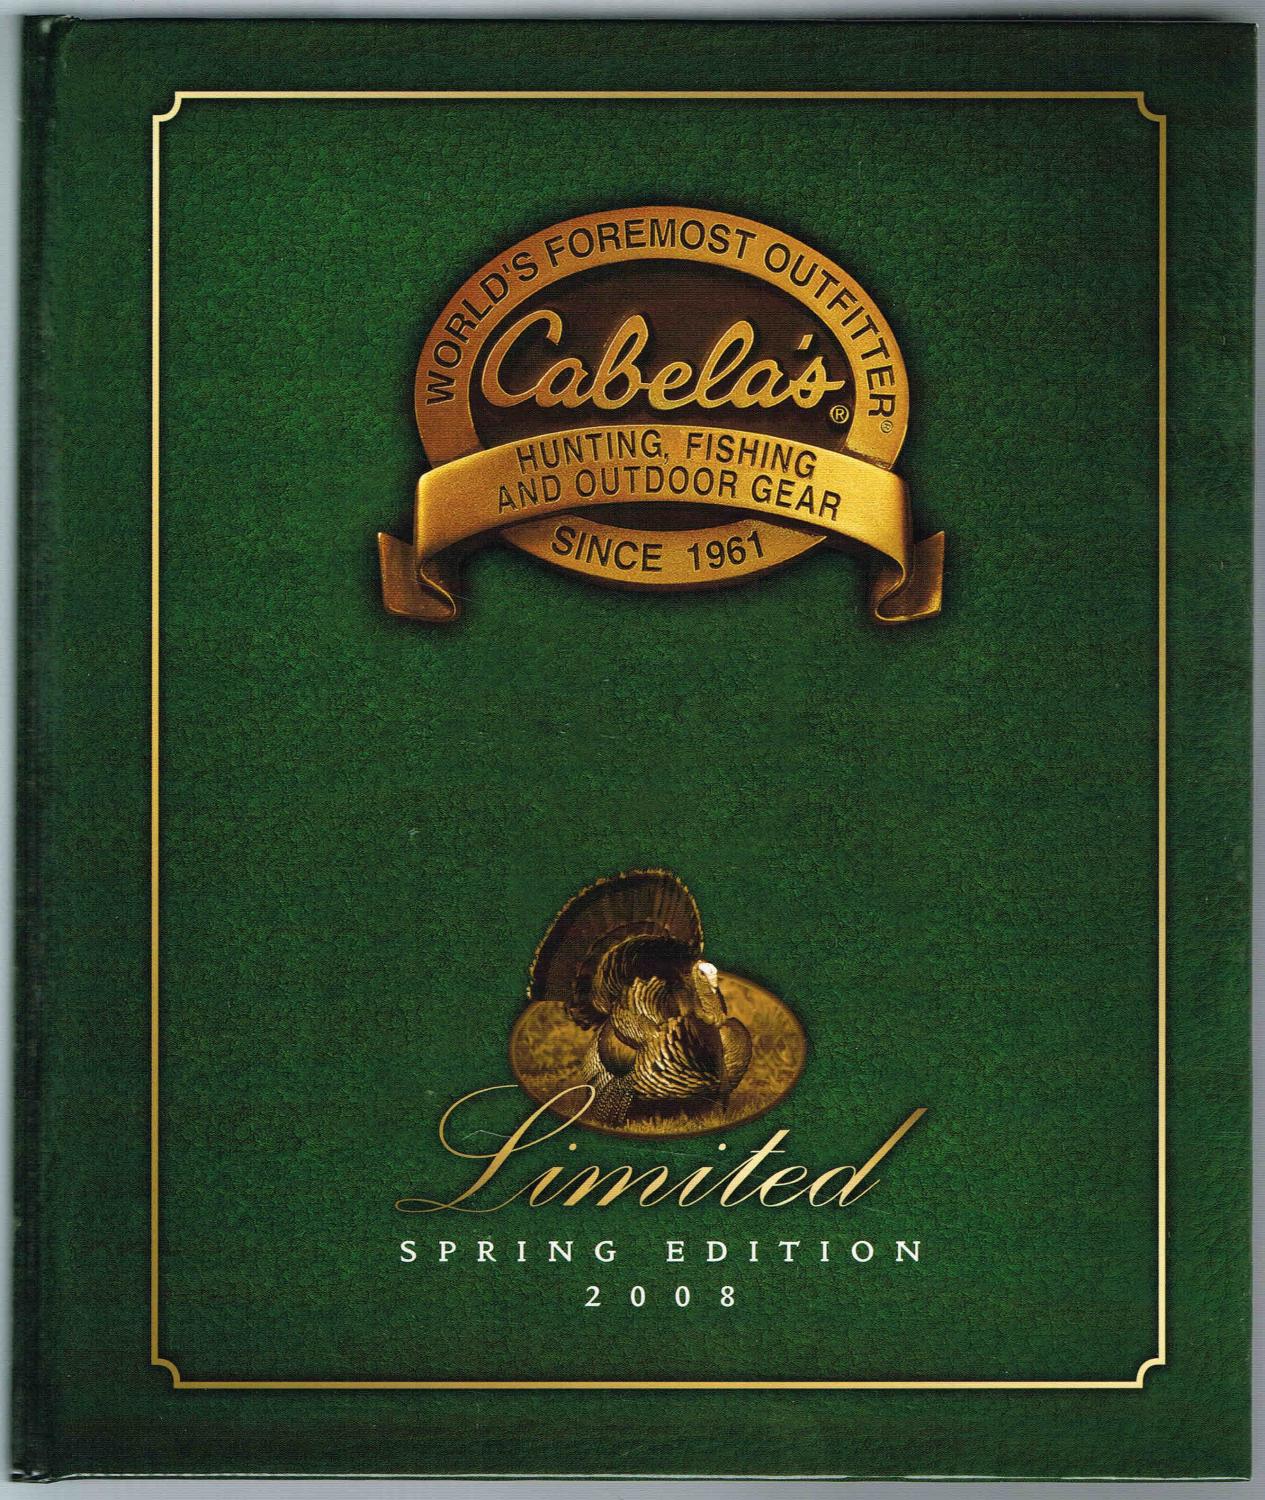 Cabela's HUNTING, FISHING AND OUTDOOR GEAR: Limited SPRING EDITION 2008,  Volume XI by Cabela, Dick; Cabela, Jim; et.al.: Very Good Hardcover (2008)  1st.